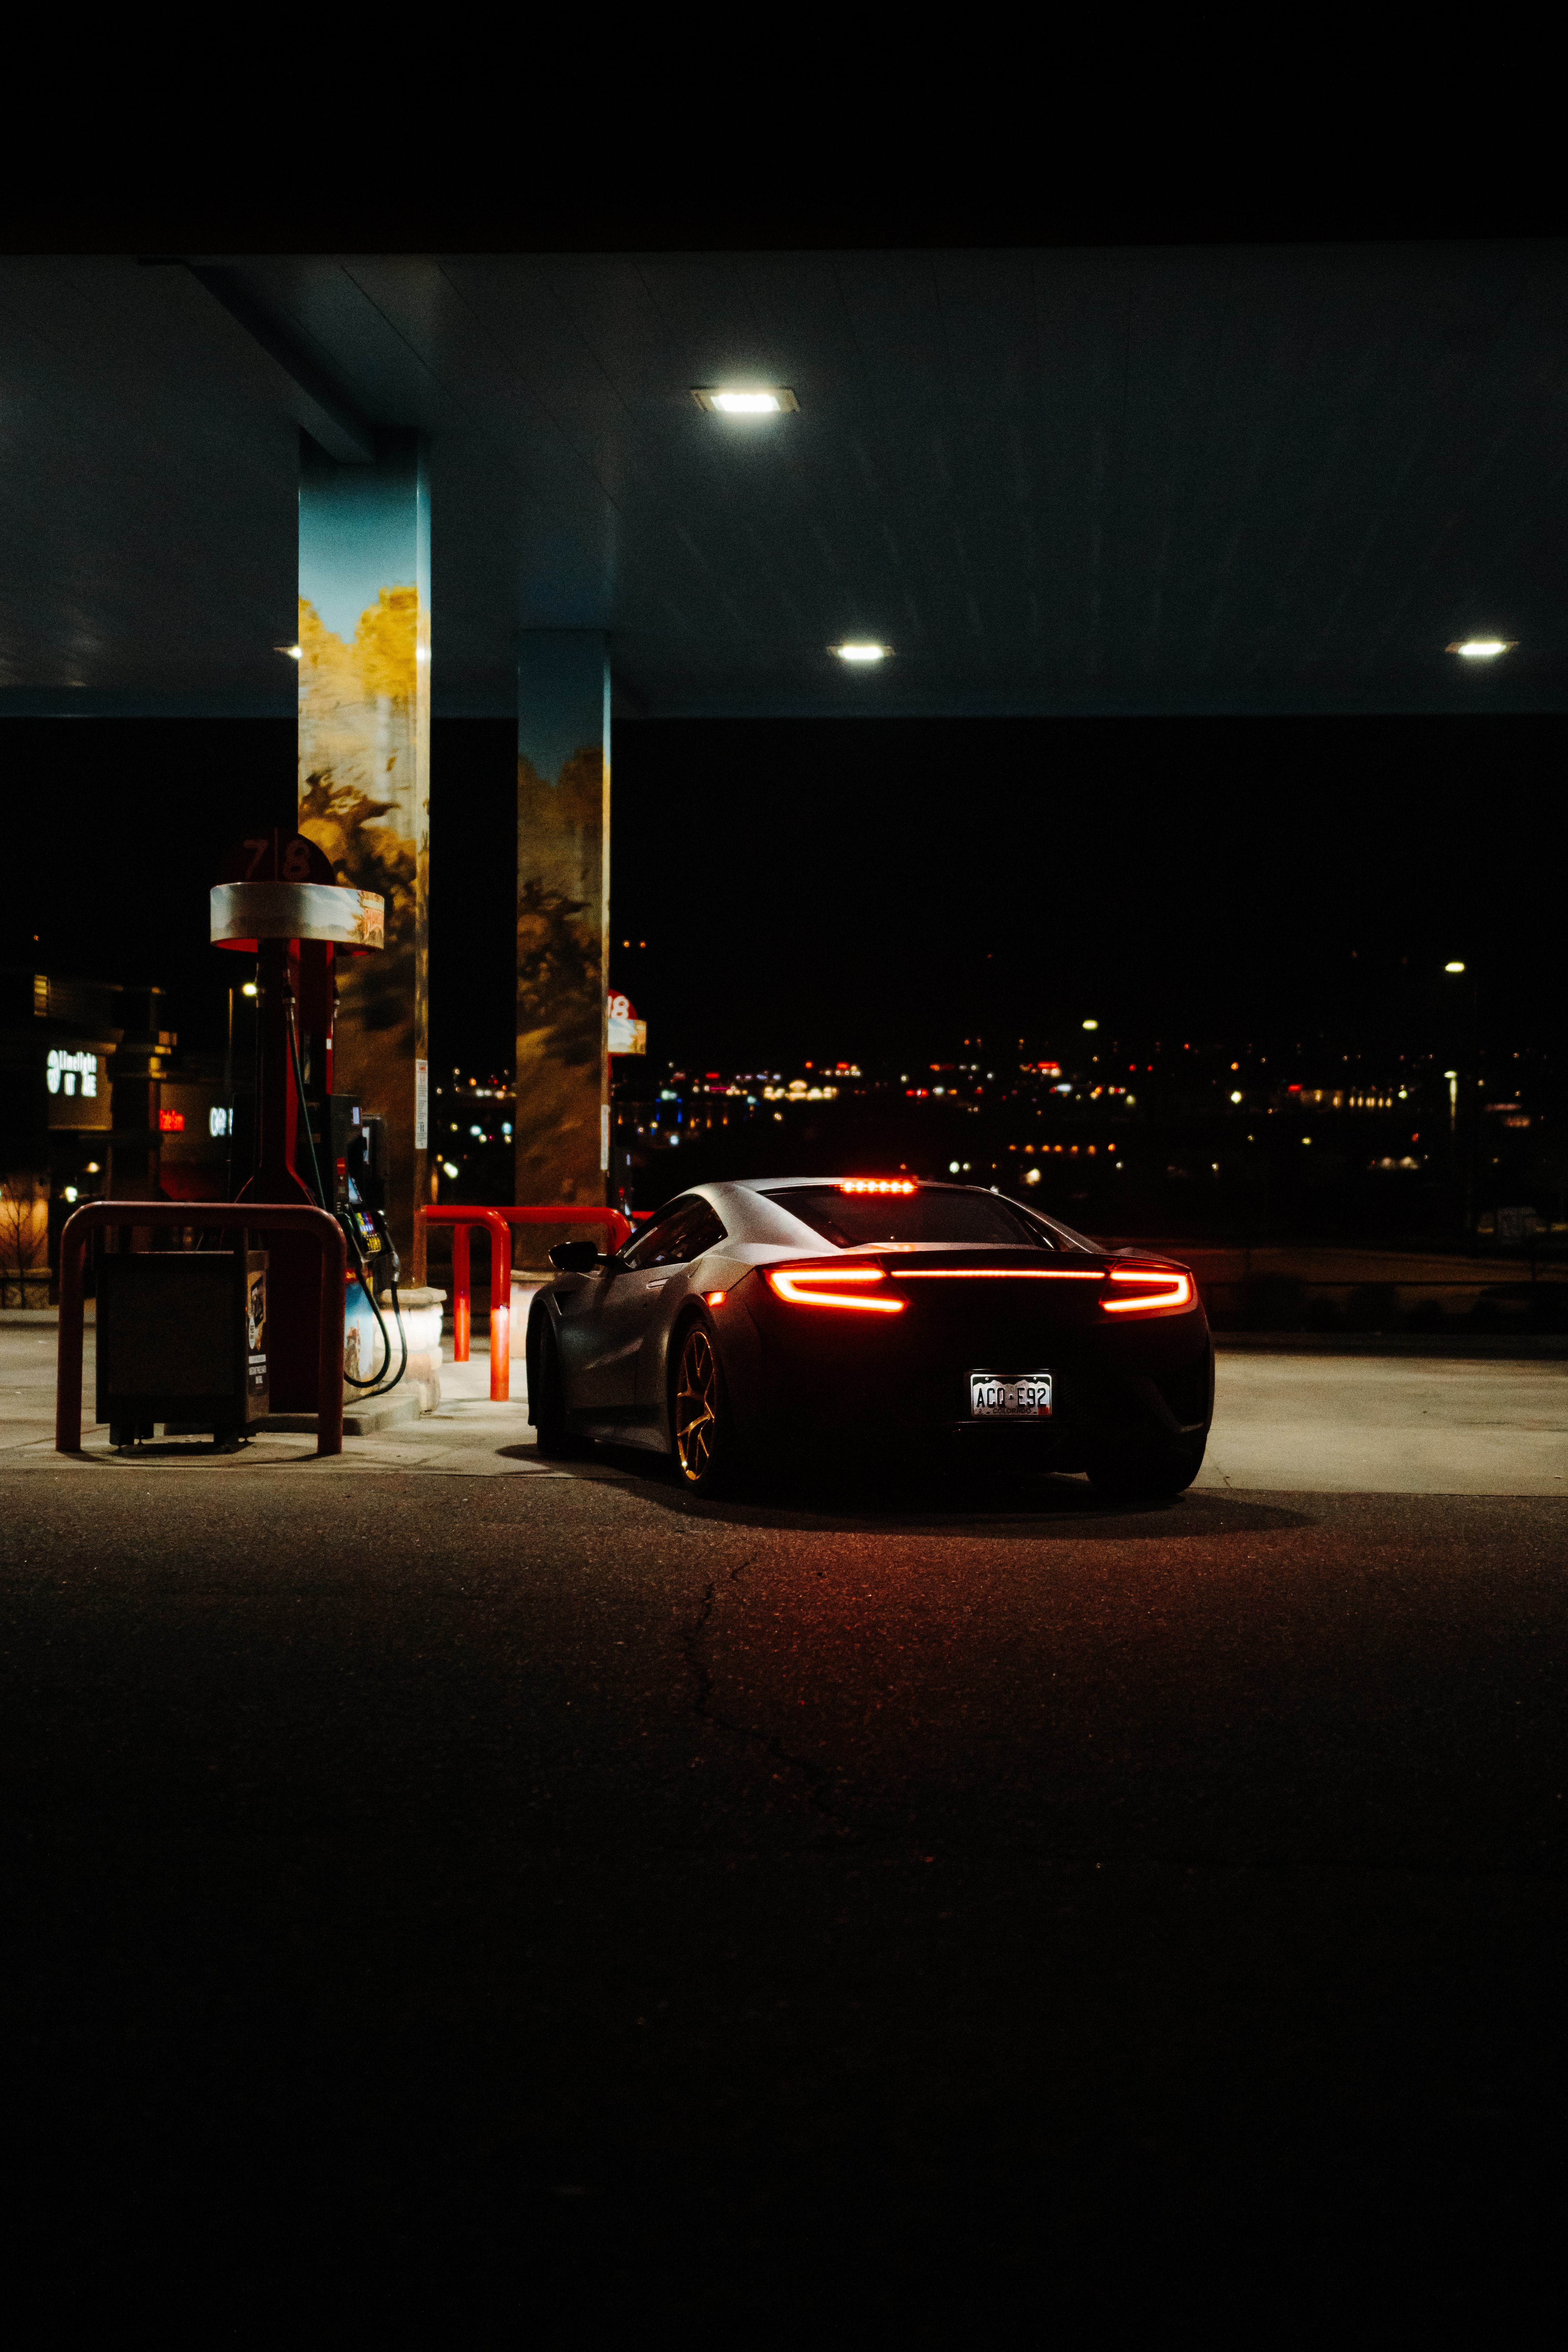 rear view, cars, back view, black, lights, car, lanterns, refueling, filling images